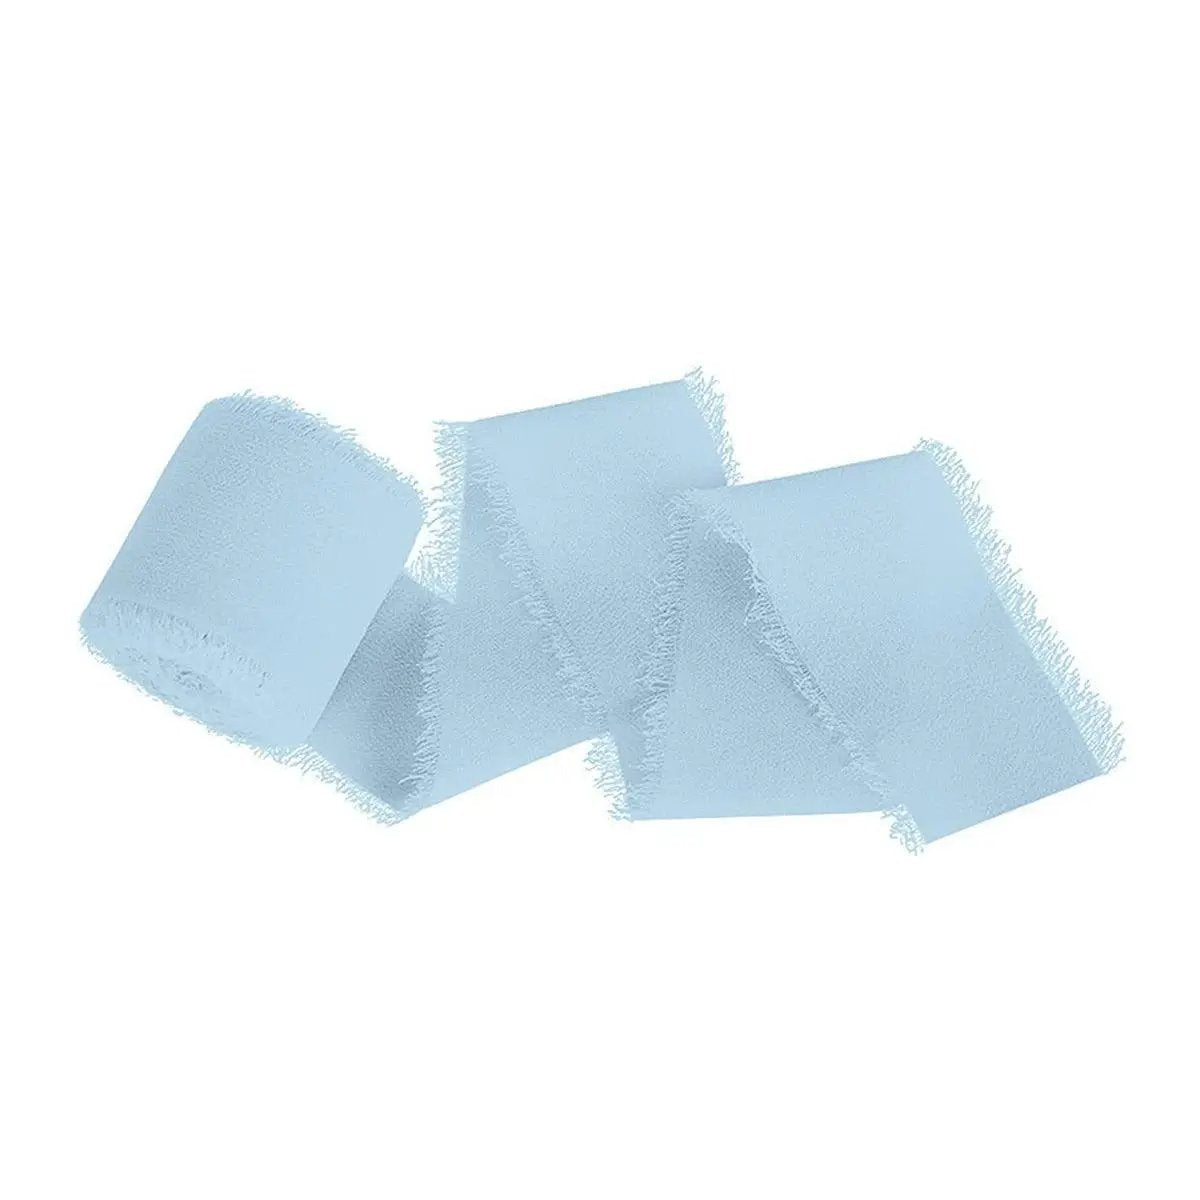 three pieces of blue cloth on a white background